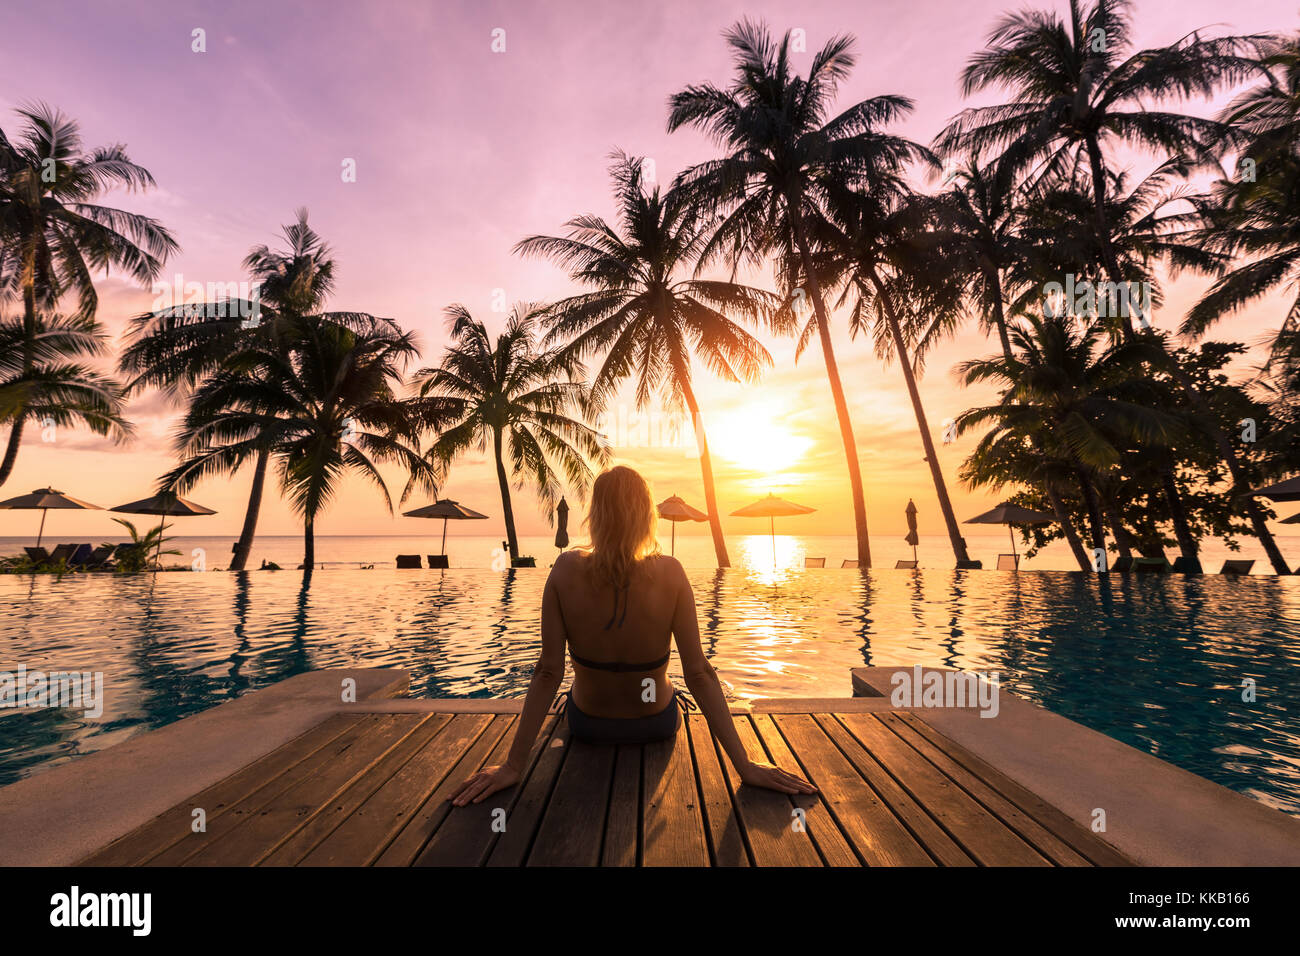 Woman relaxing by the pool in a luxurious beachfront hotel resort at sunset enjoying perfect beach holiday vacation Stock Photo